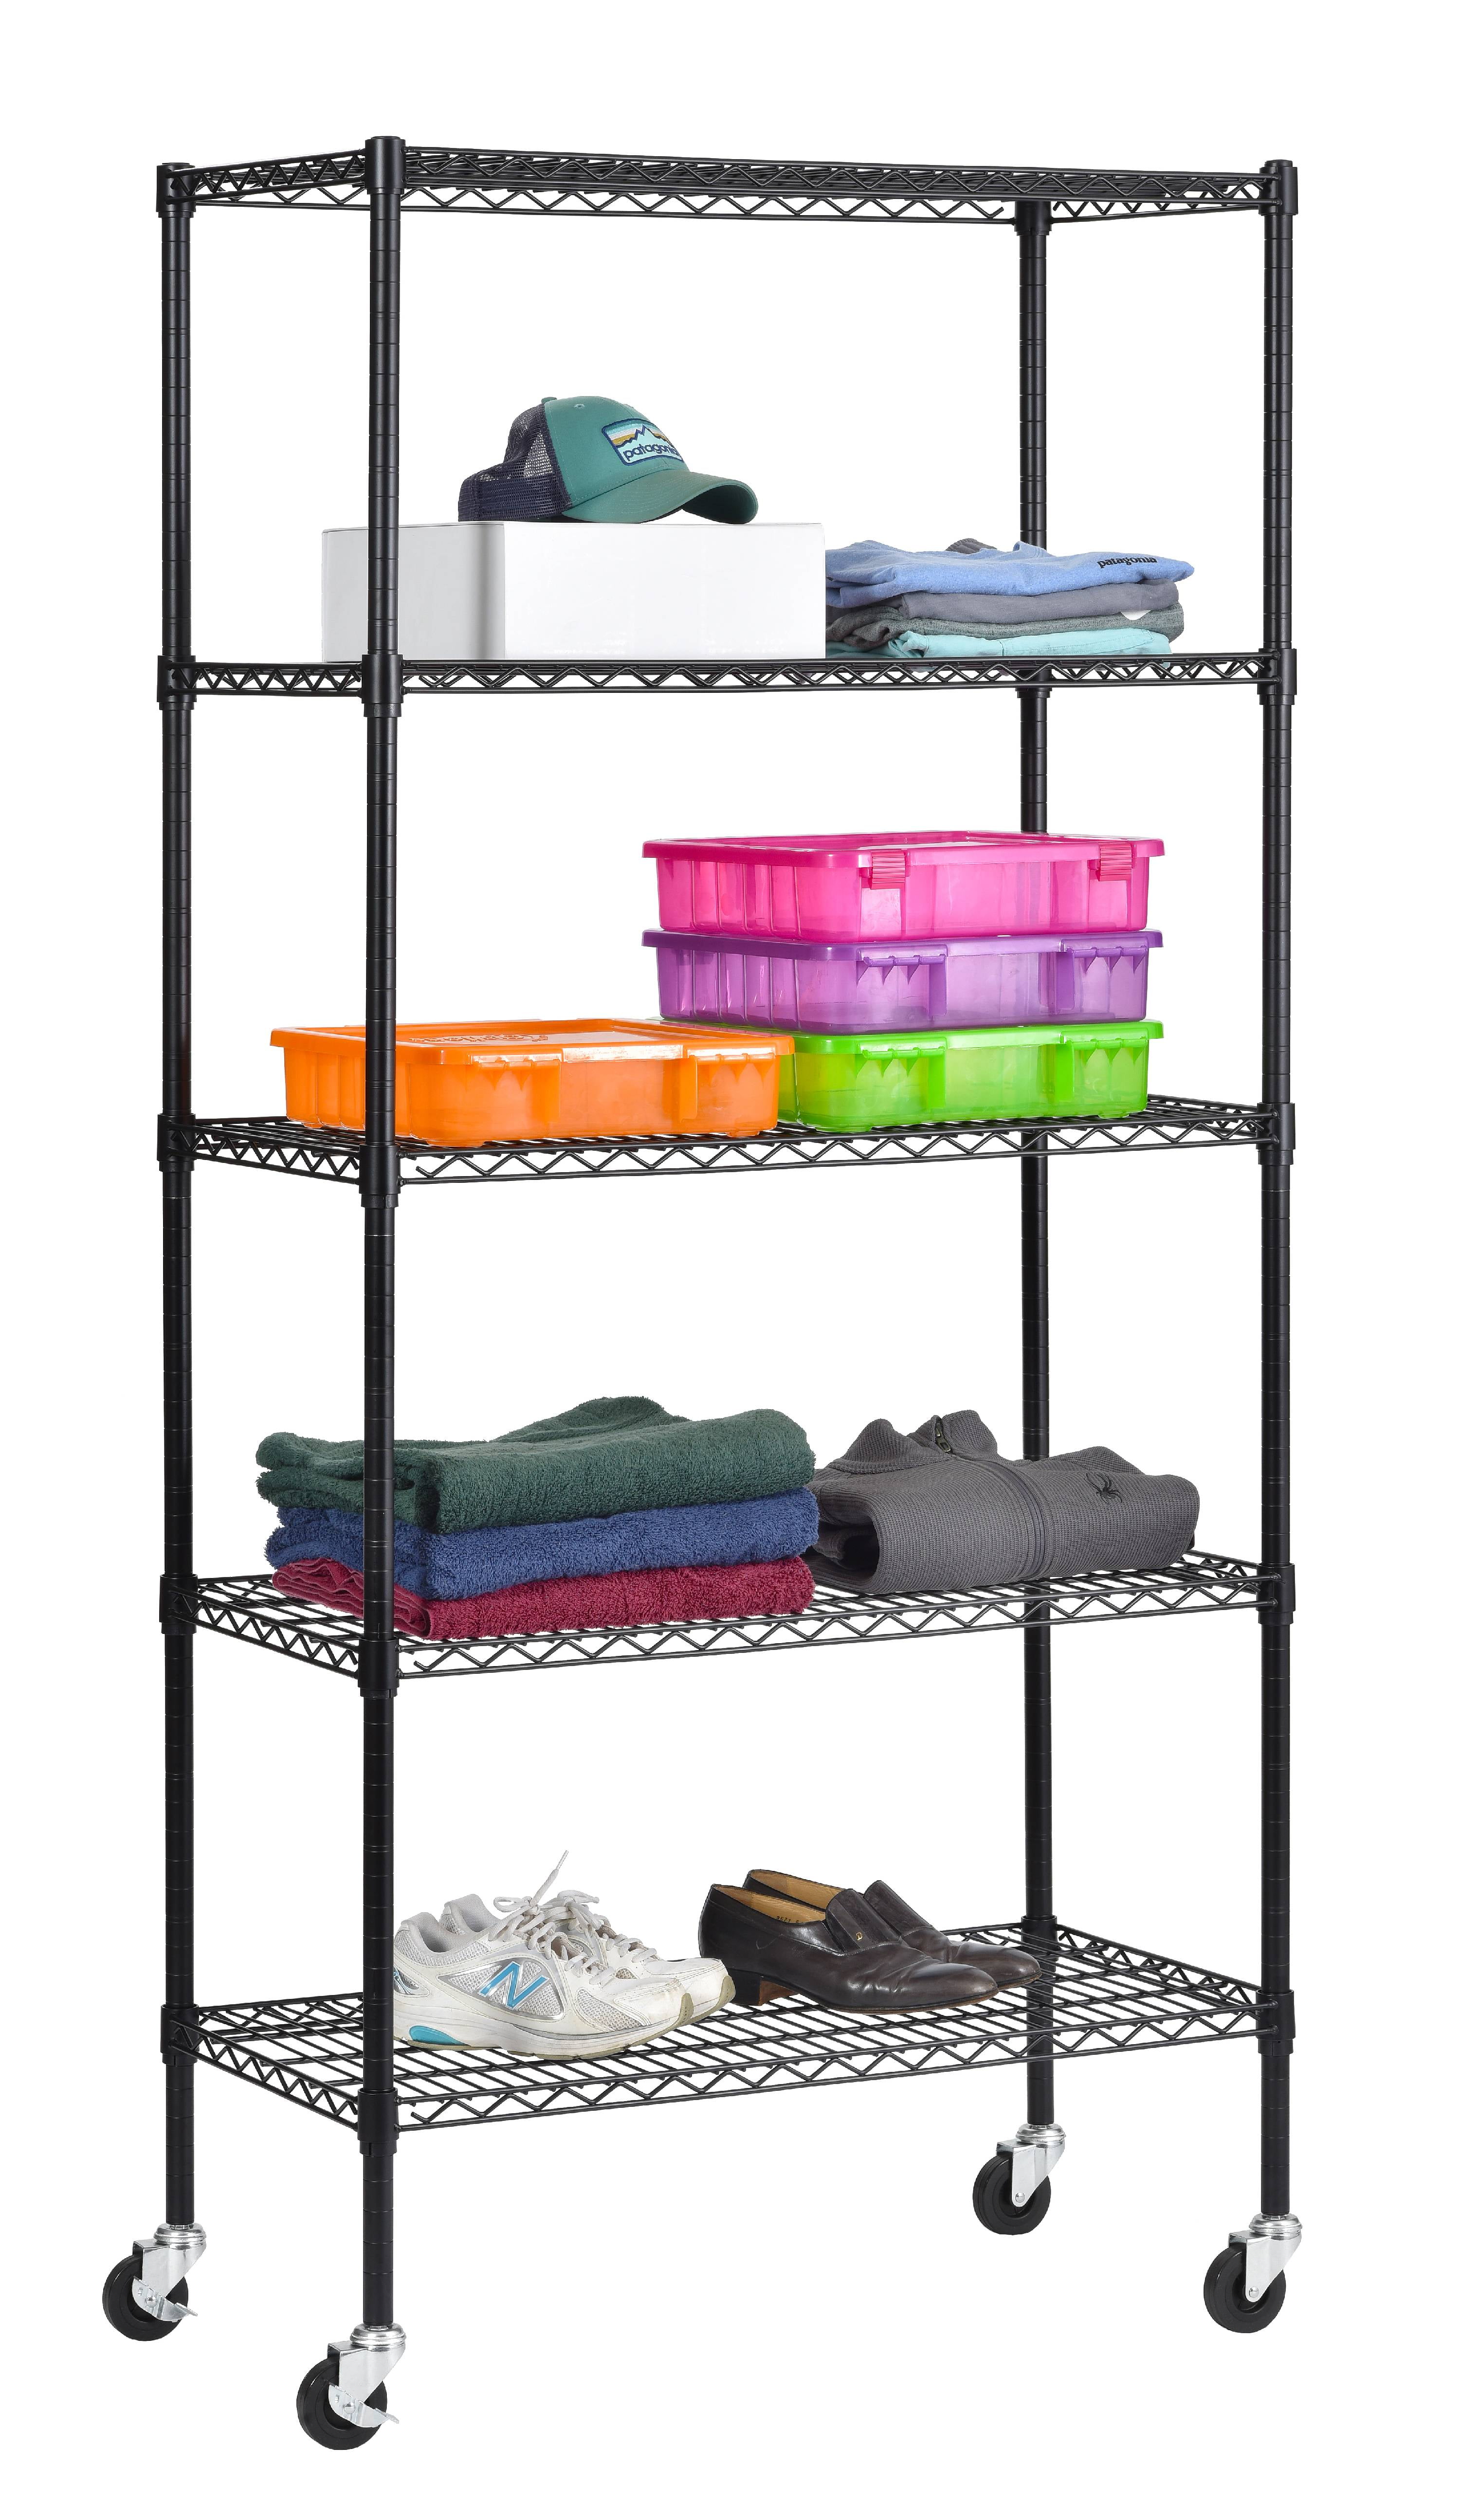 36-Inch Wide by 80-Inch High by 18-Inch Deep Salsbury Industries Mobile Wire Shelving Unit Black 